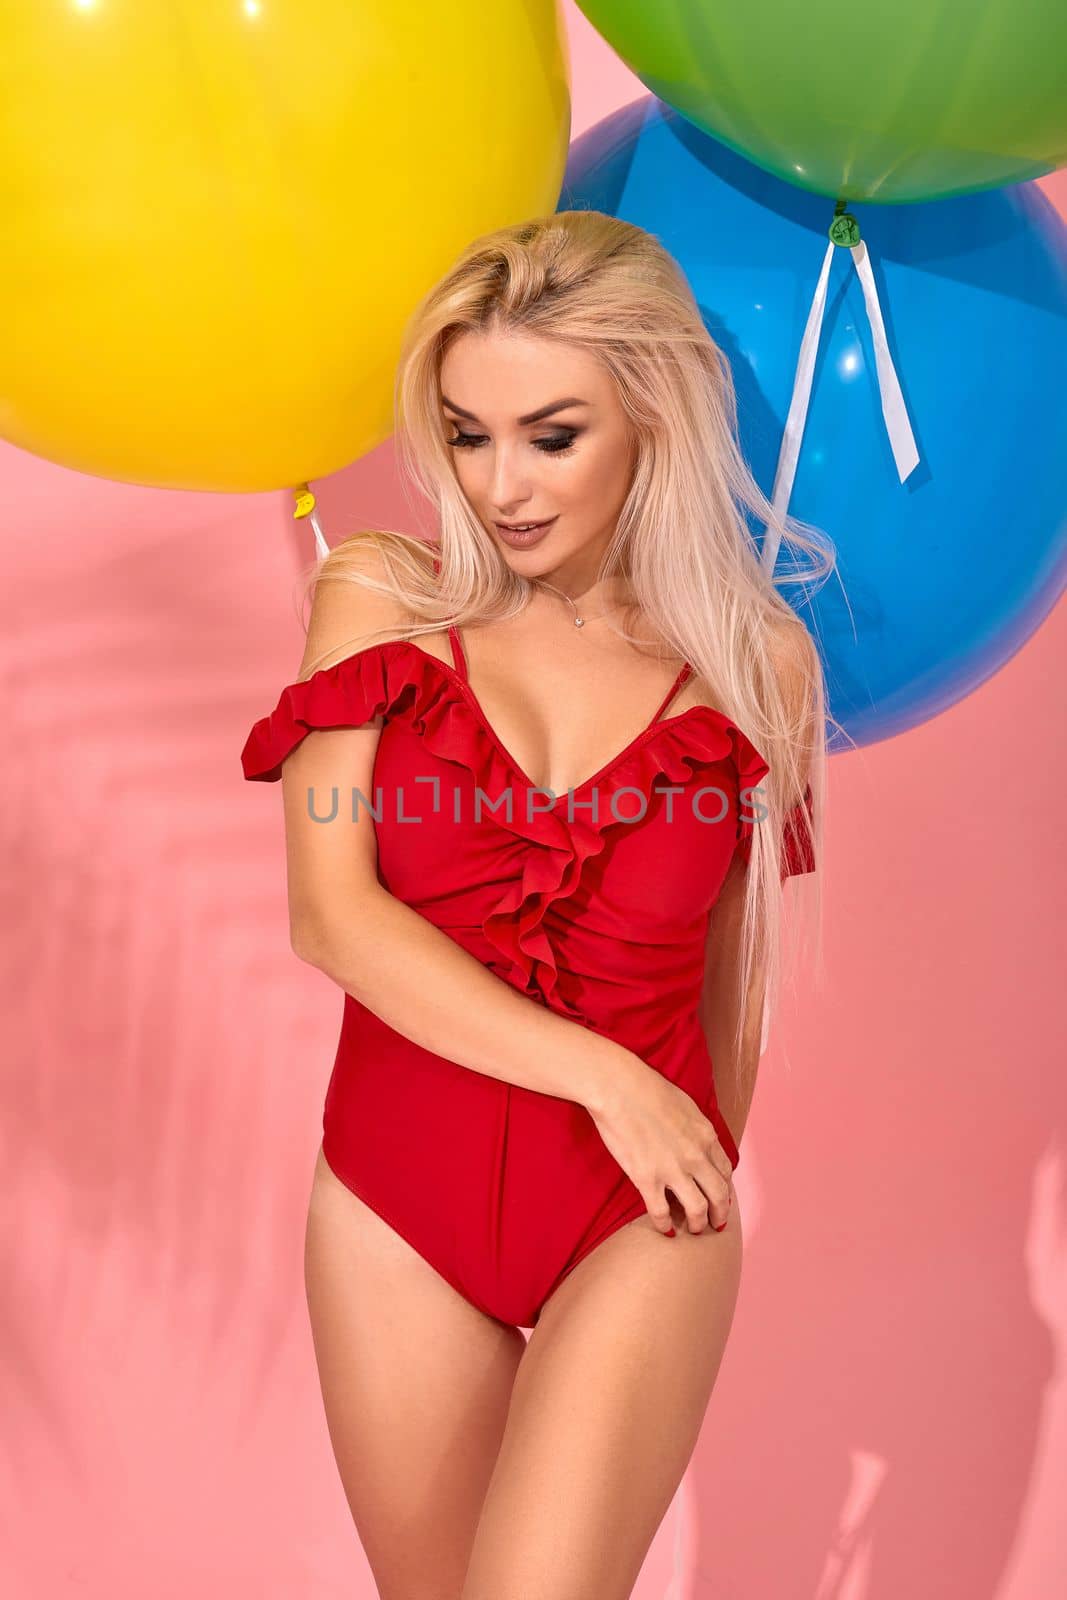 Sexy slim woman in a red swimsuit with balloons in her hand put her hand on the hip. Full length fashion portrait of a beautiful girl with long blond hair, on a pink background.